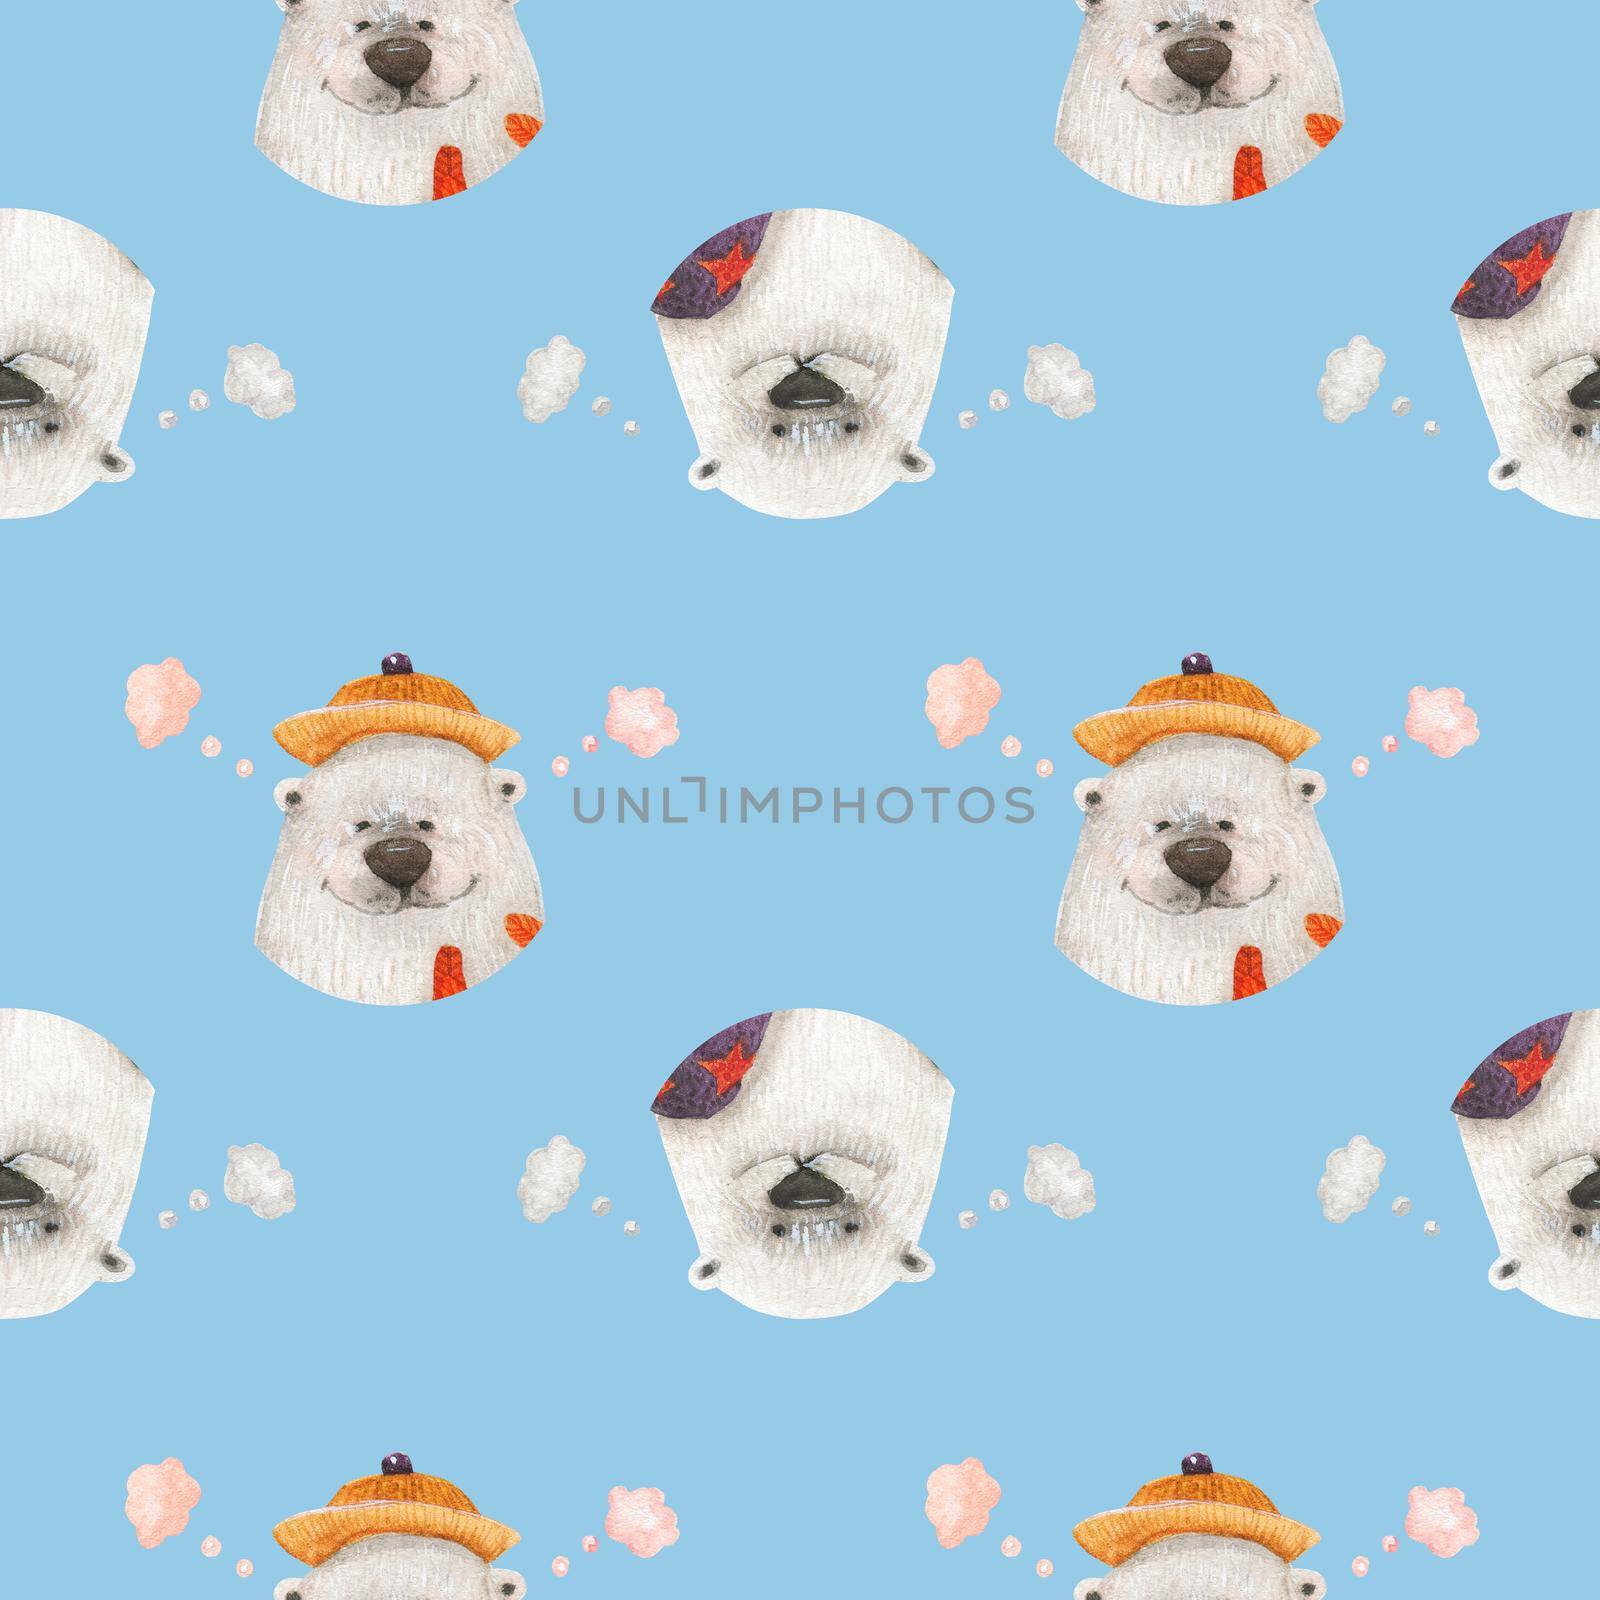 Polar bear healthy lifestyle. Bears in sauna. Watercolor seamless patterns for textile, wrapping paper and any tiled design. Blue background, clipping path uncluded